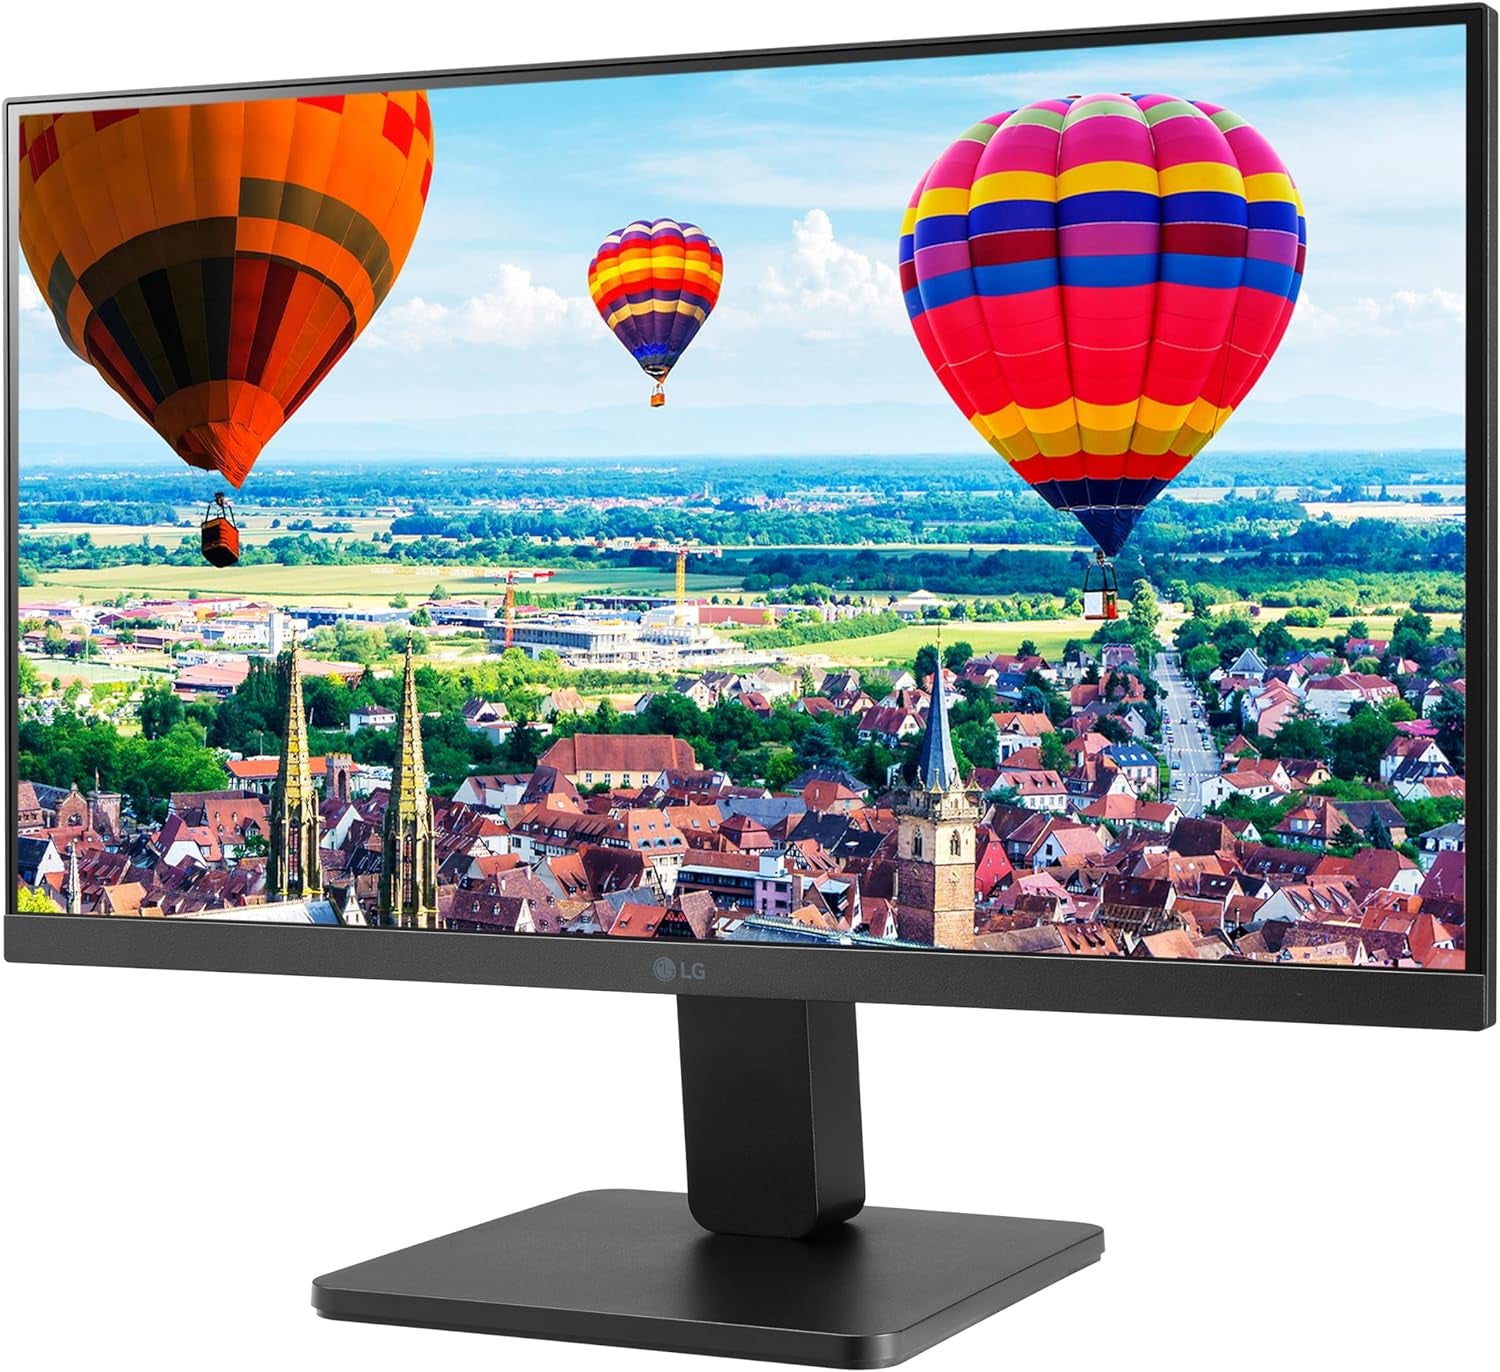 22MR41A 22” Full HD VA Monitor with AMD Freesync and 100Hz Refresh Rate